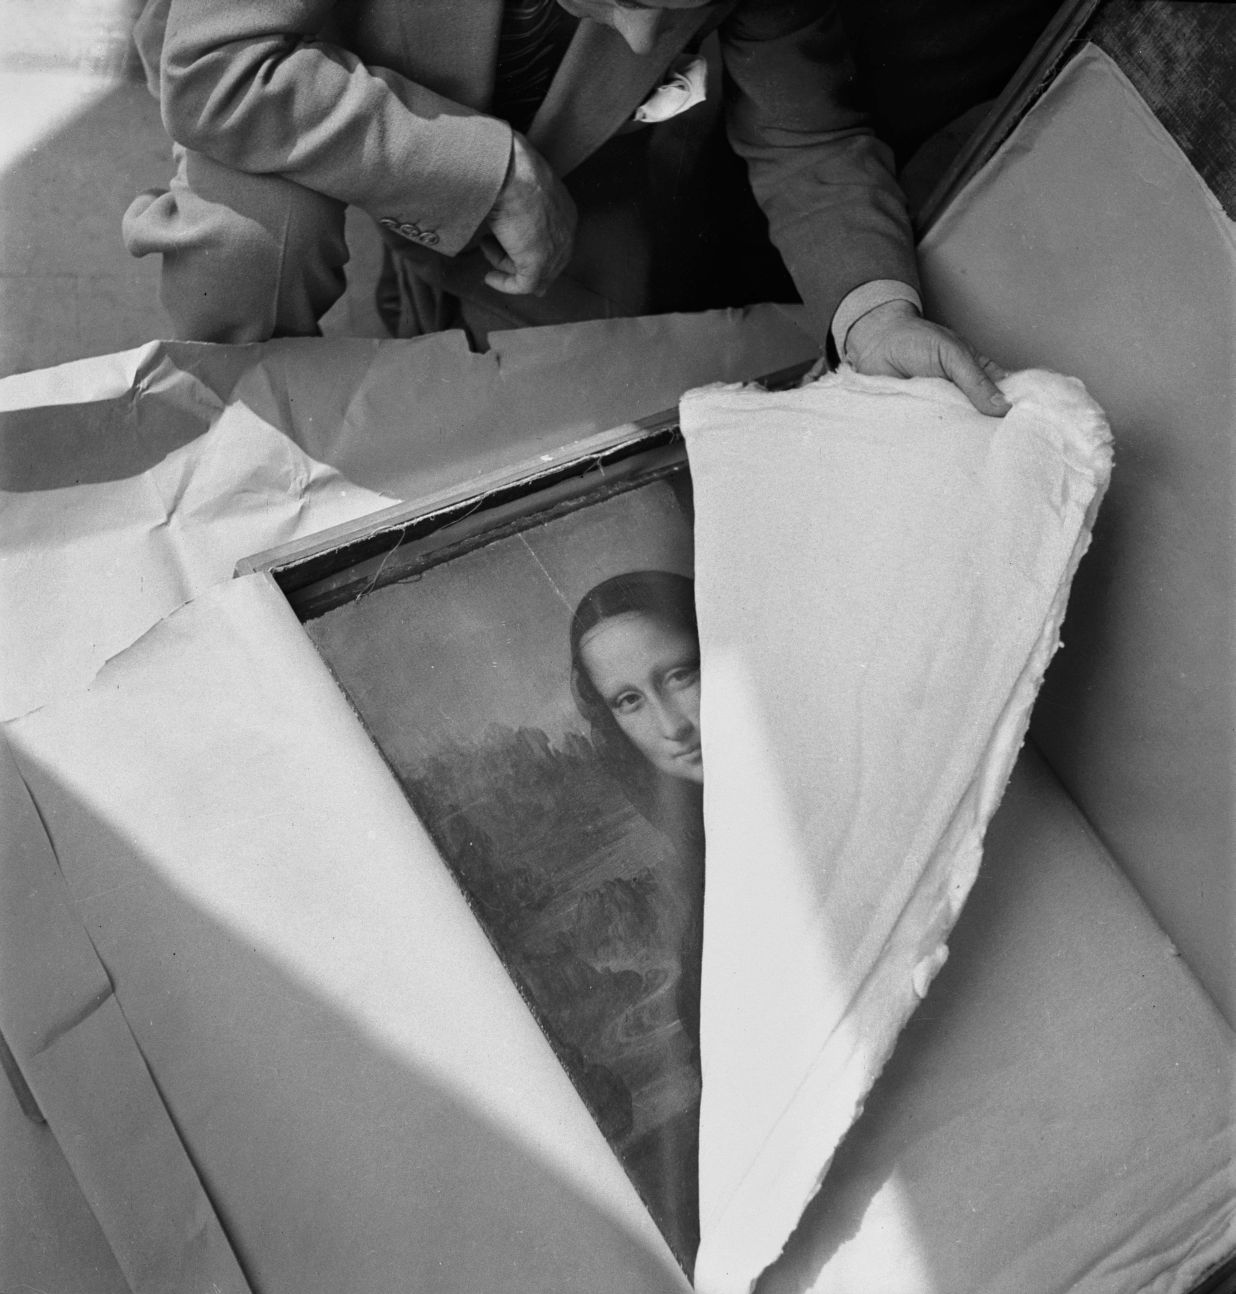 Opening the Mona Lisa after WWII